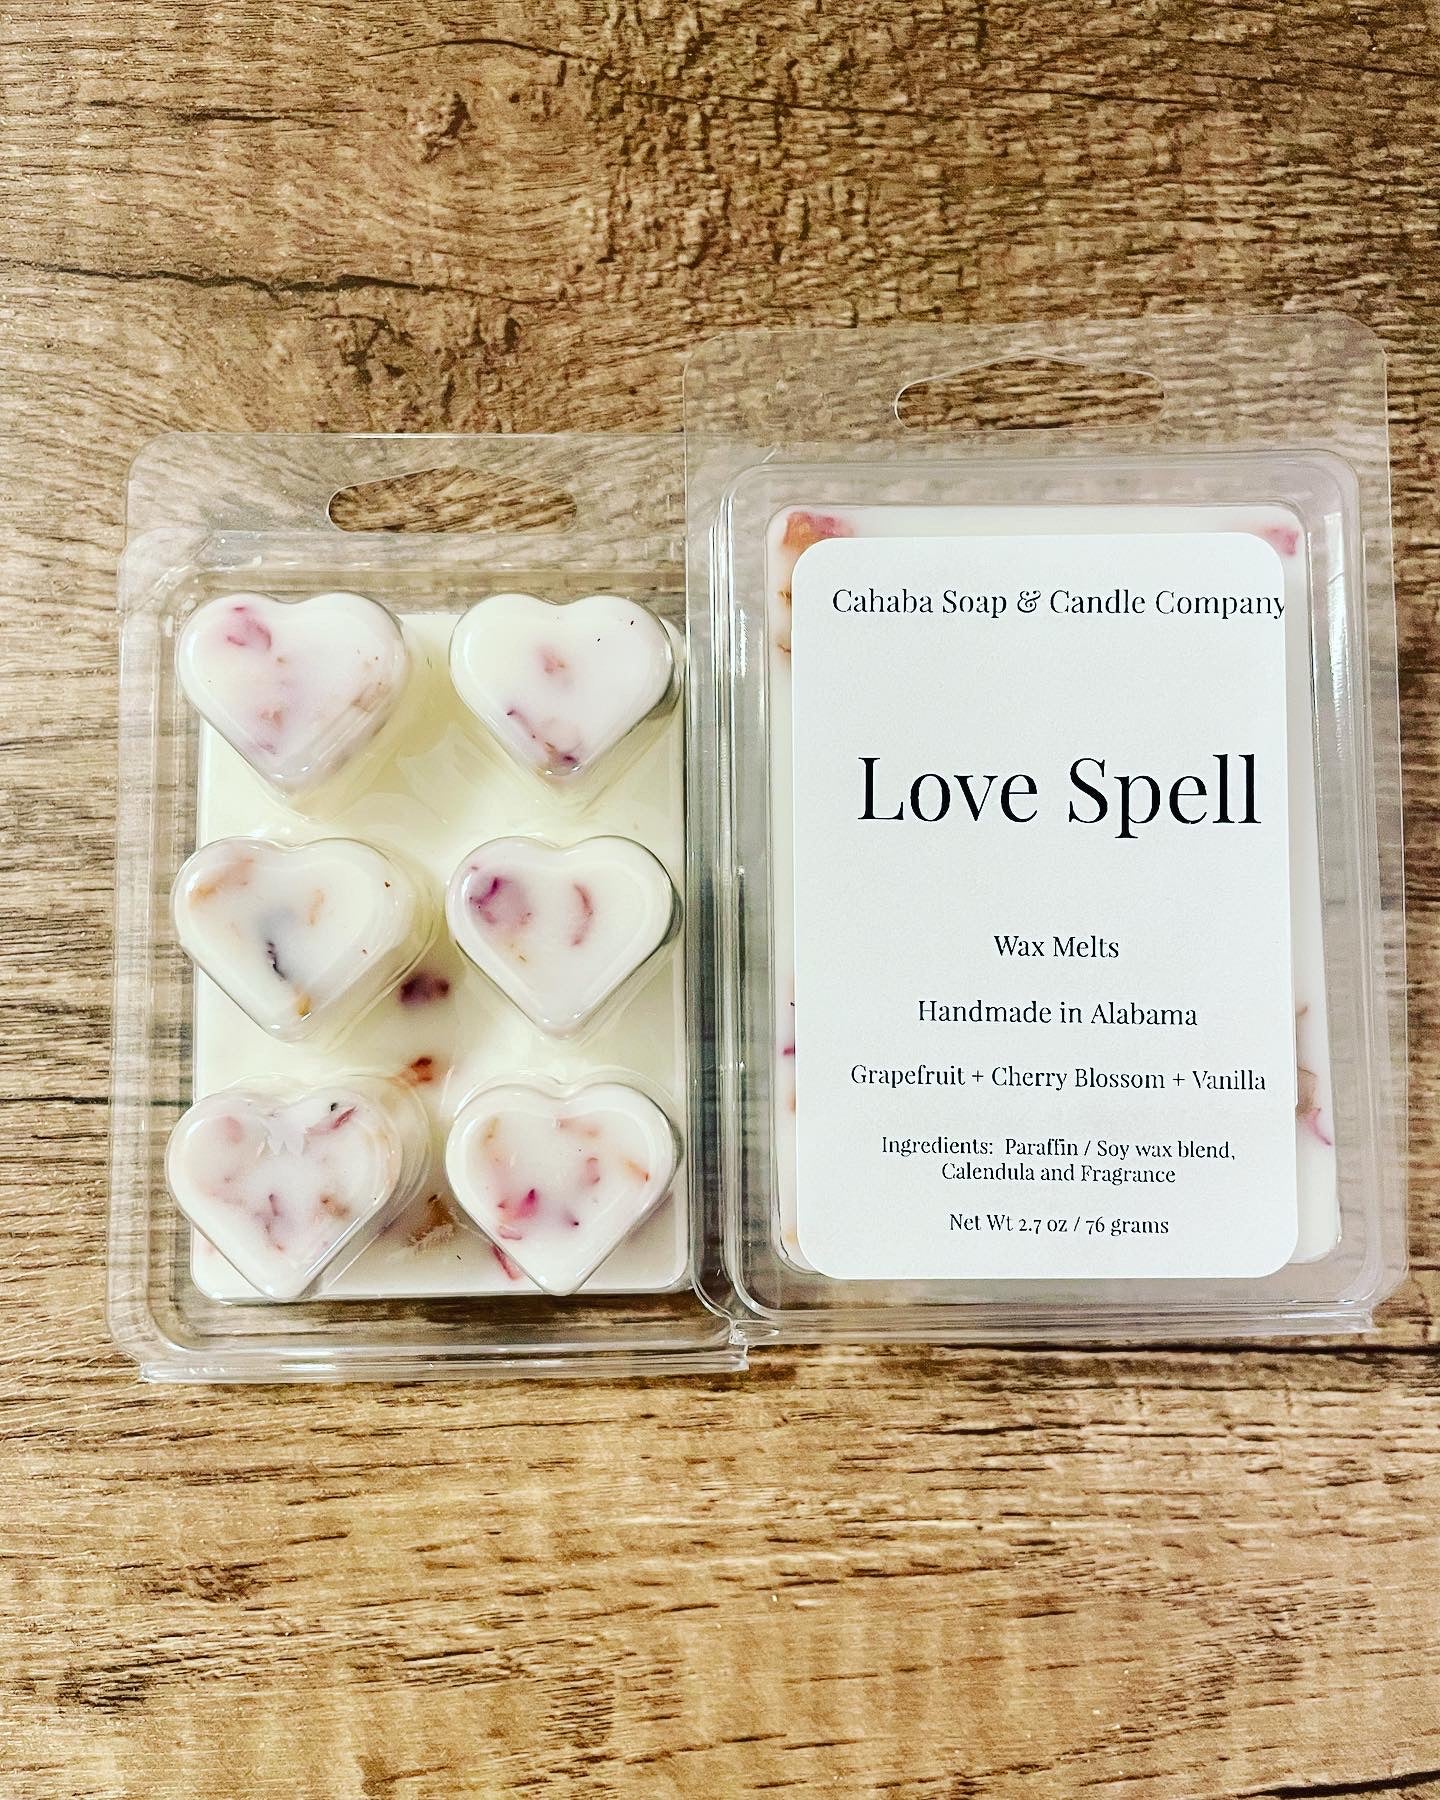 Love Spell    Wax Melts - Cahaba Soap and Candle Company